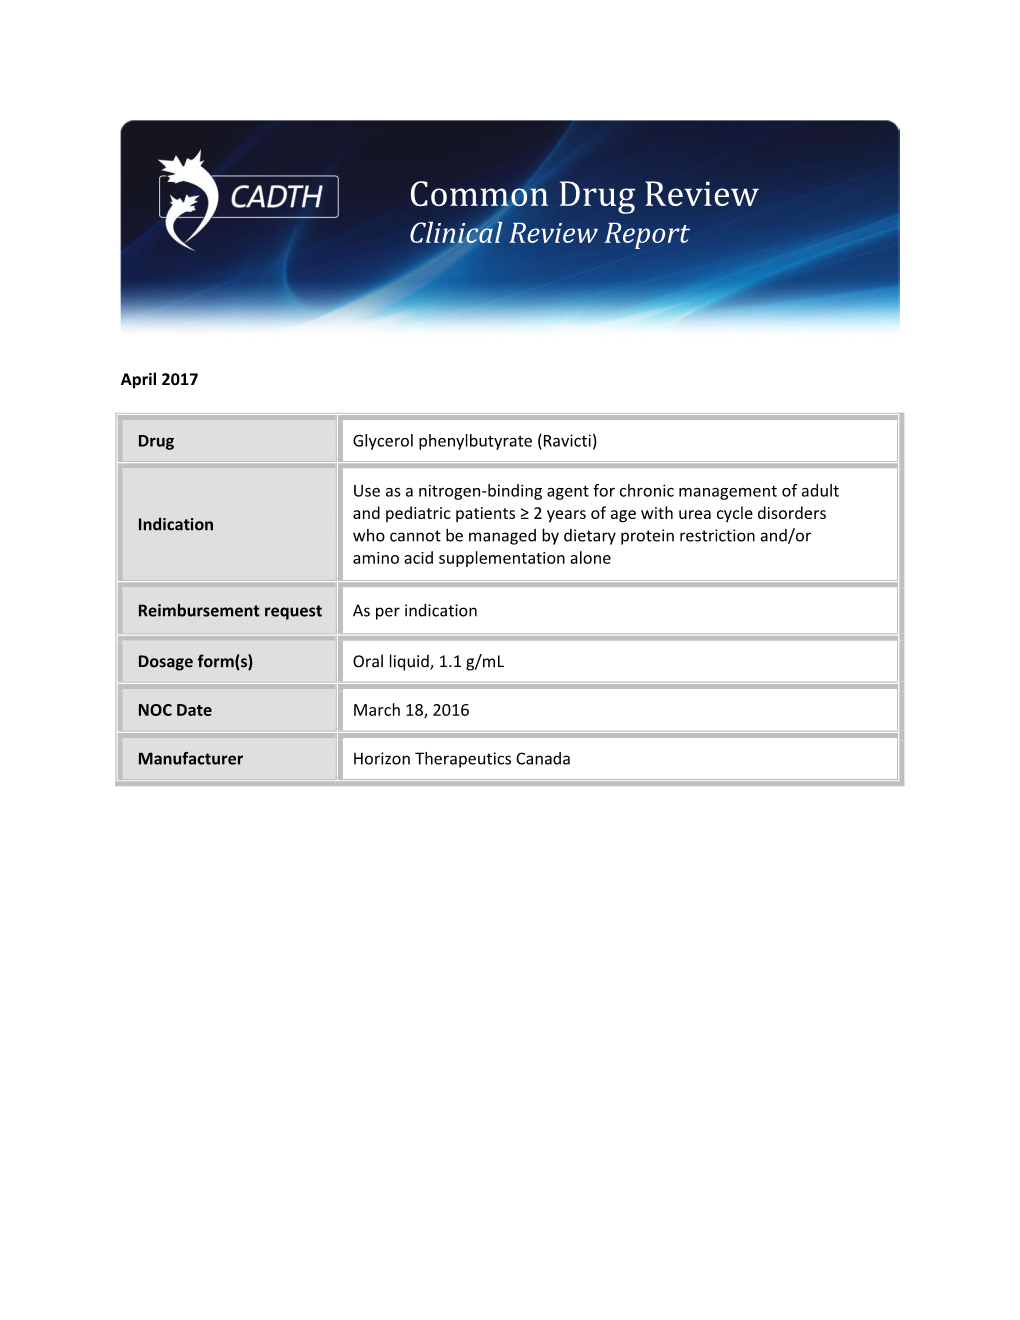 Cdr Clinical Review Report for Ravicti